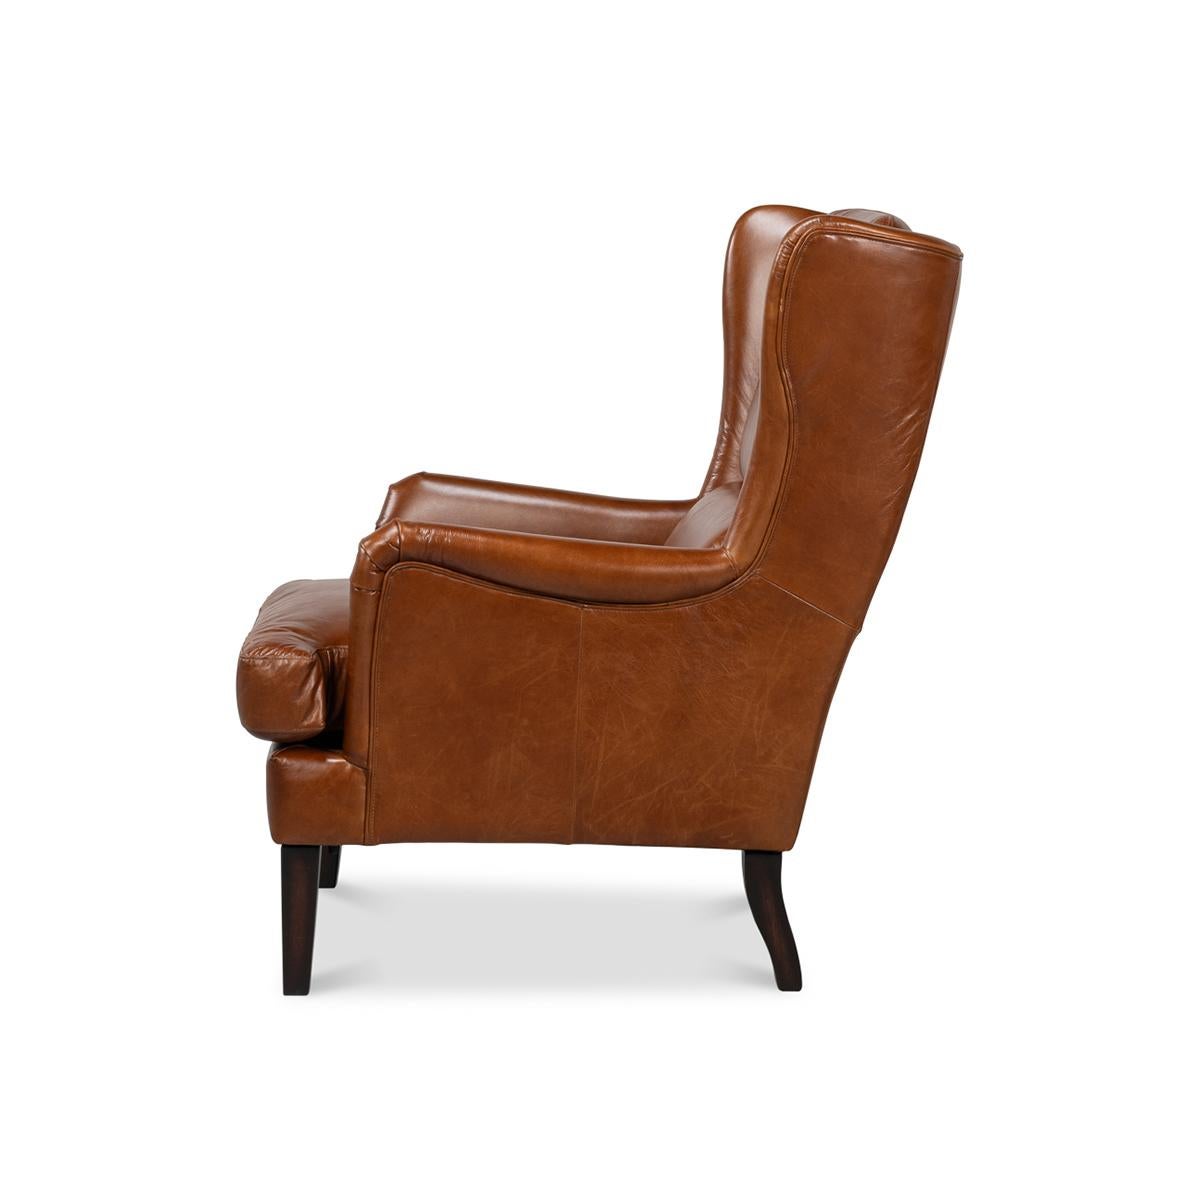 With brown traditional top grain Vintage Havana leather, with high classic wingback backrest and boxed cushion seat raised on tapered legs.

Dimensions: 28